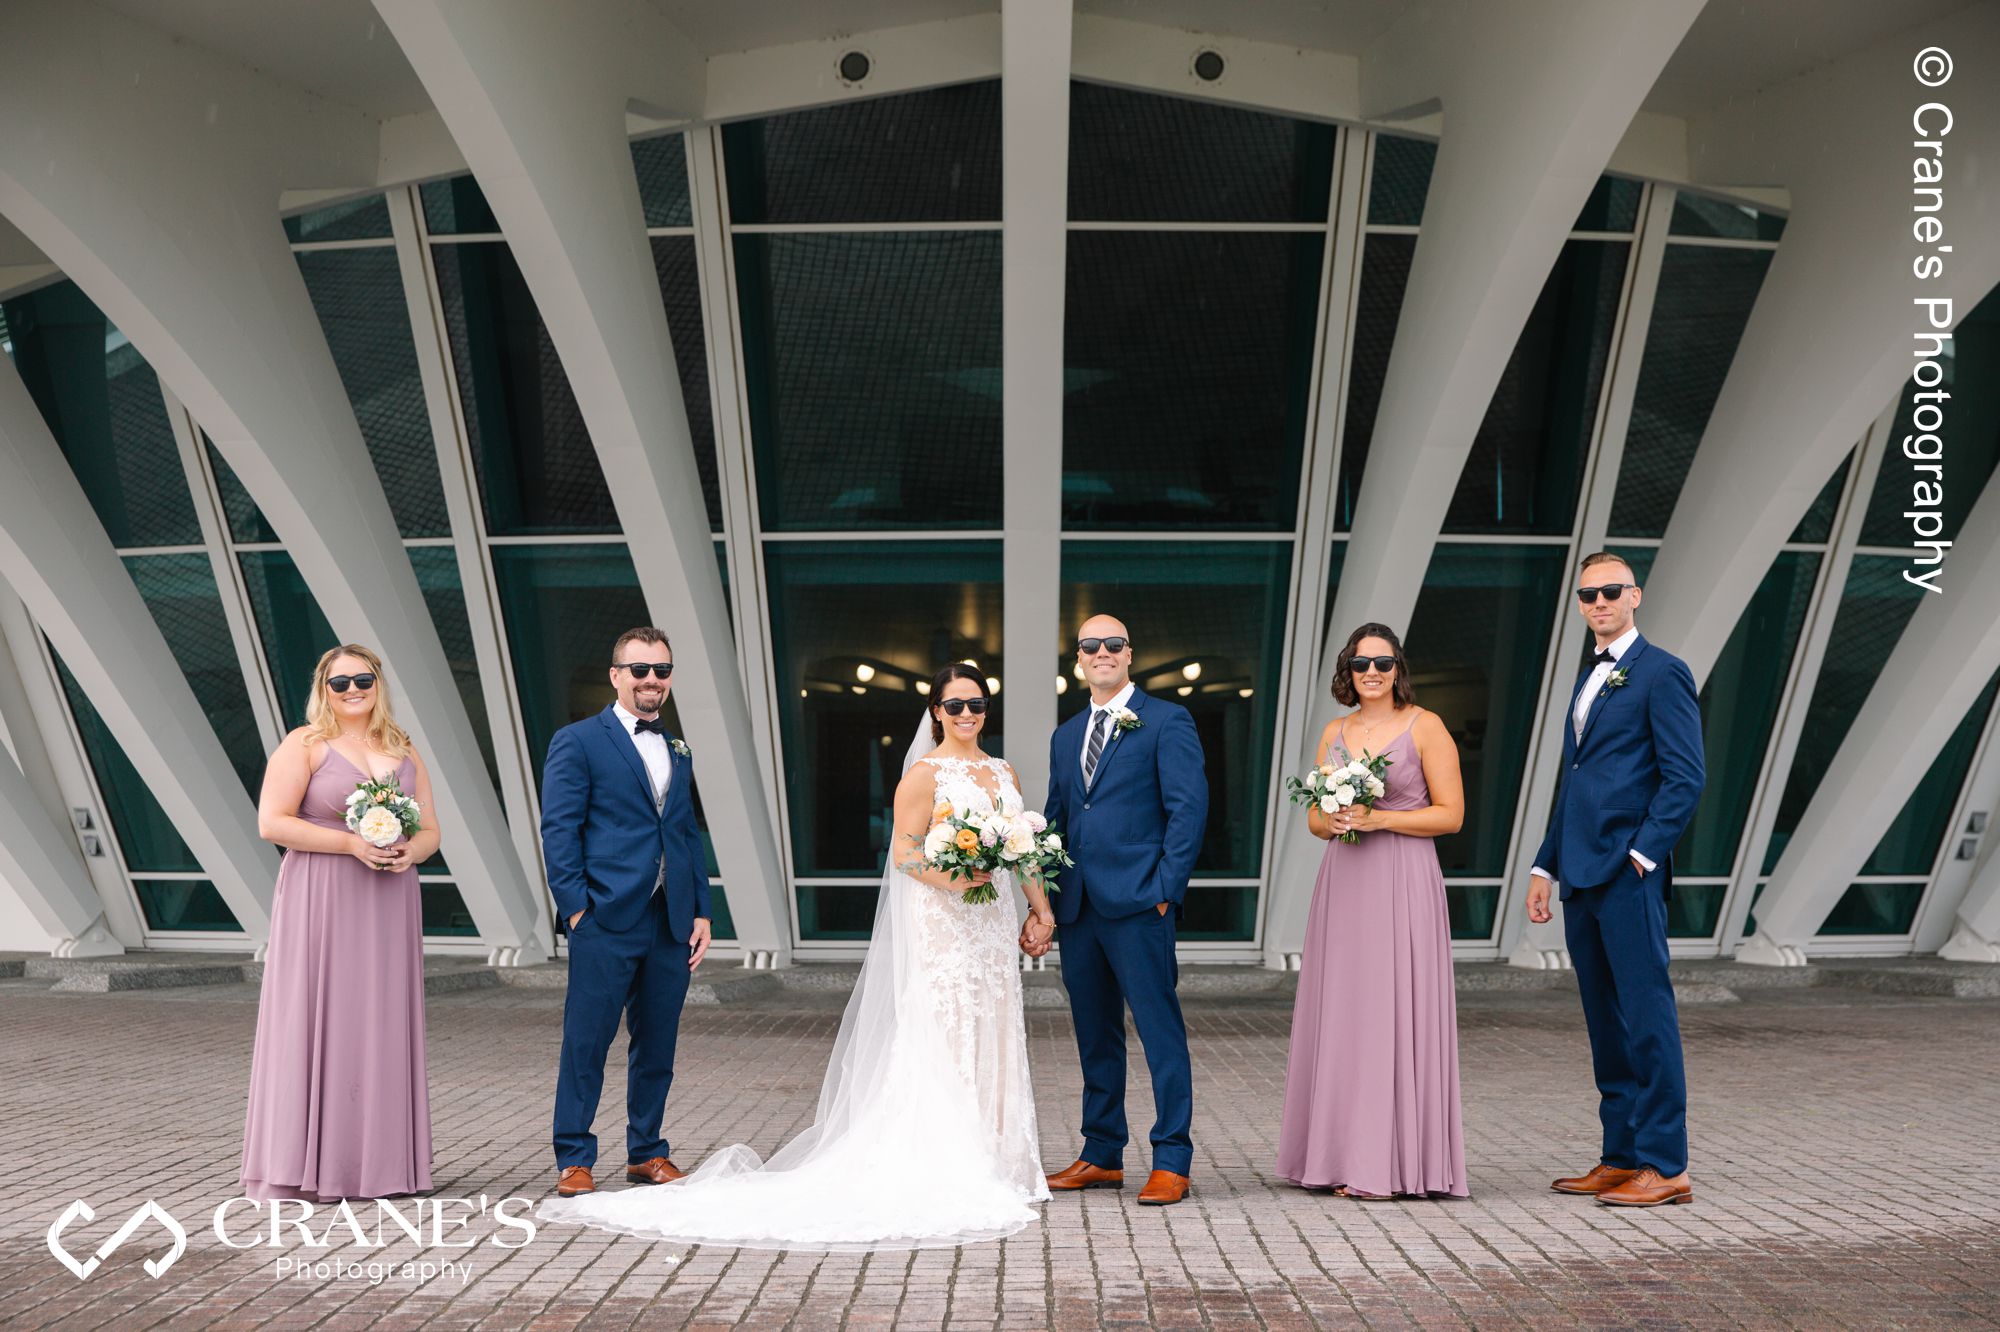 Wedding party photo at Art Museum in Downtown Milwaukee